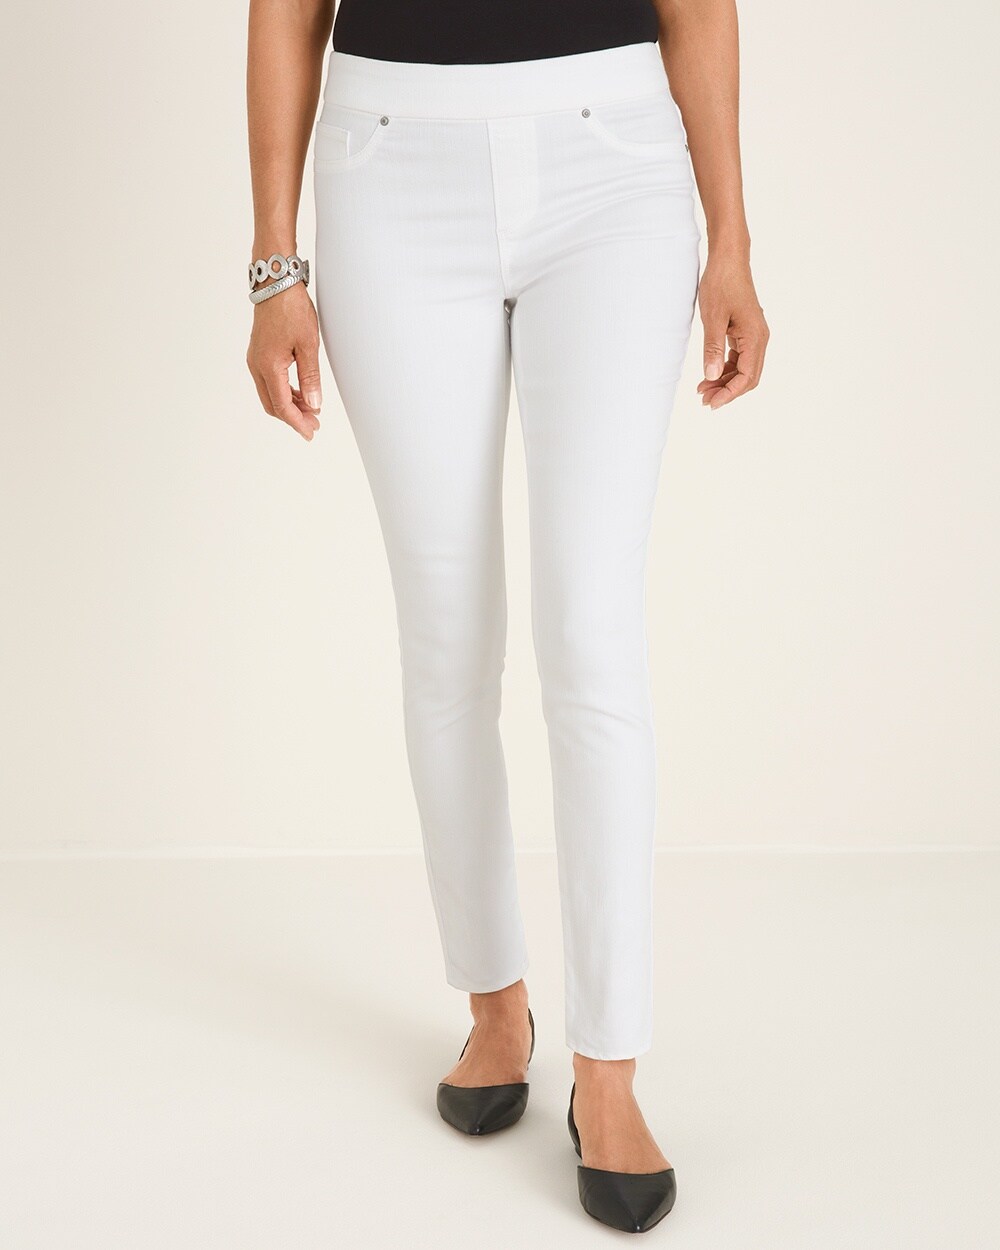 No-Stain White High-Rise Pull-On Skinny Ankle Jeans